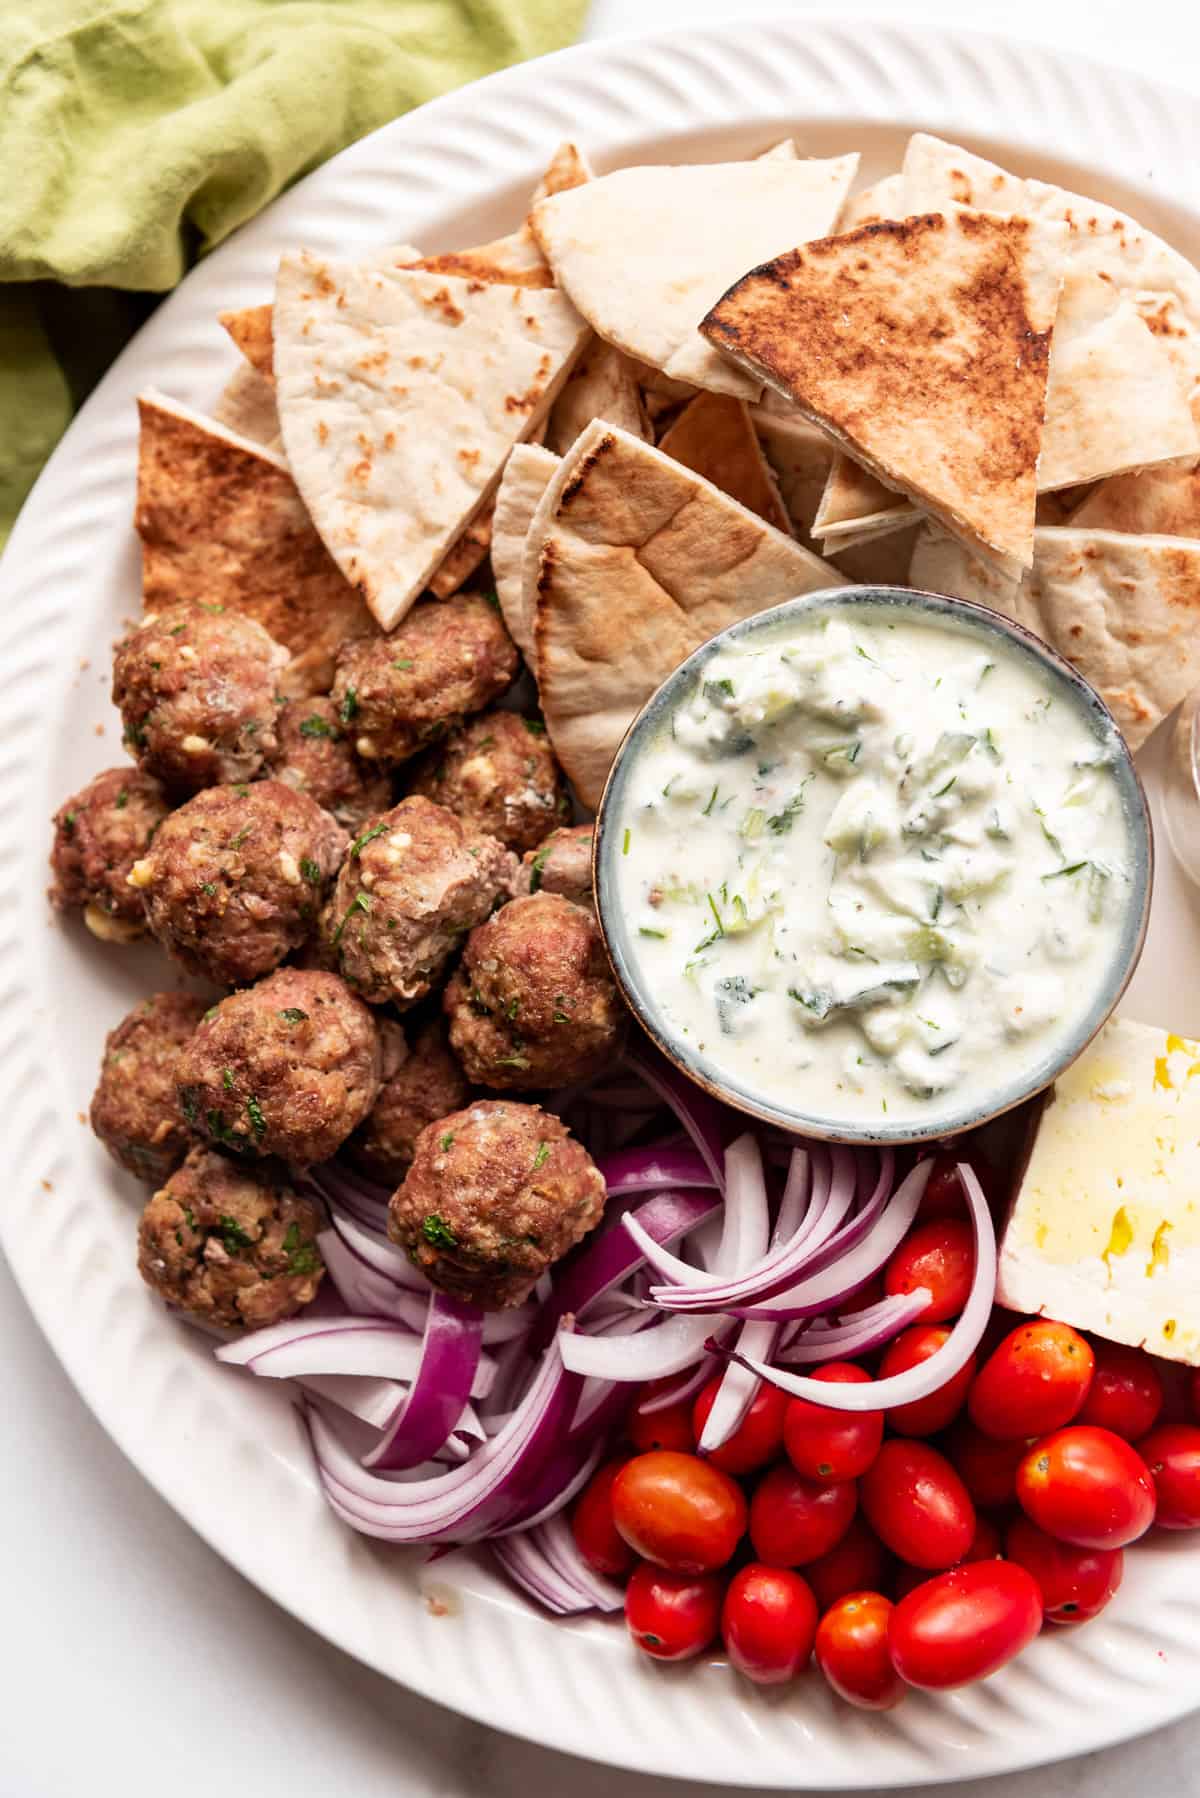 A Greek meze platter with meatballs, tzatziki sauce, pita bread triangles, red onions, grape tomatoes, and feta cheese.